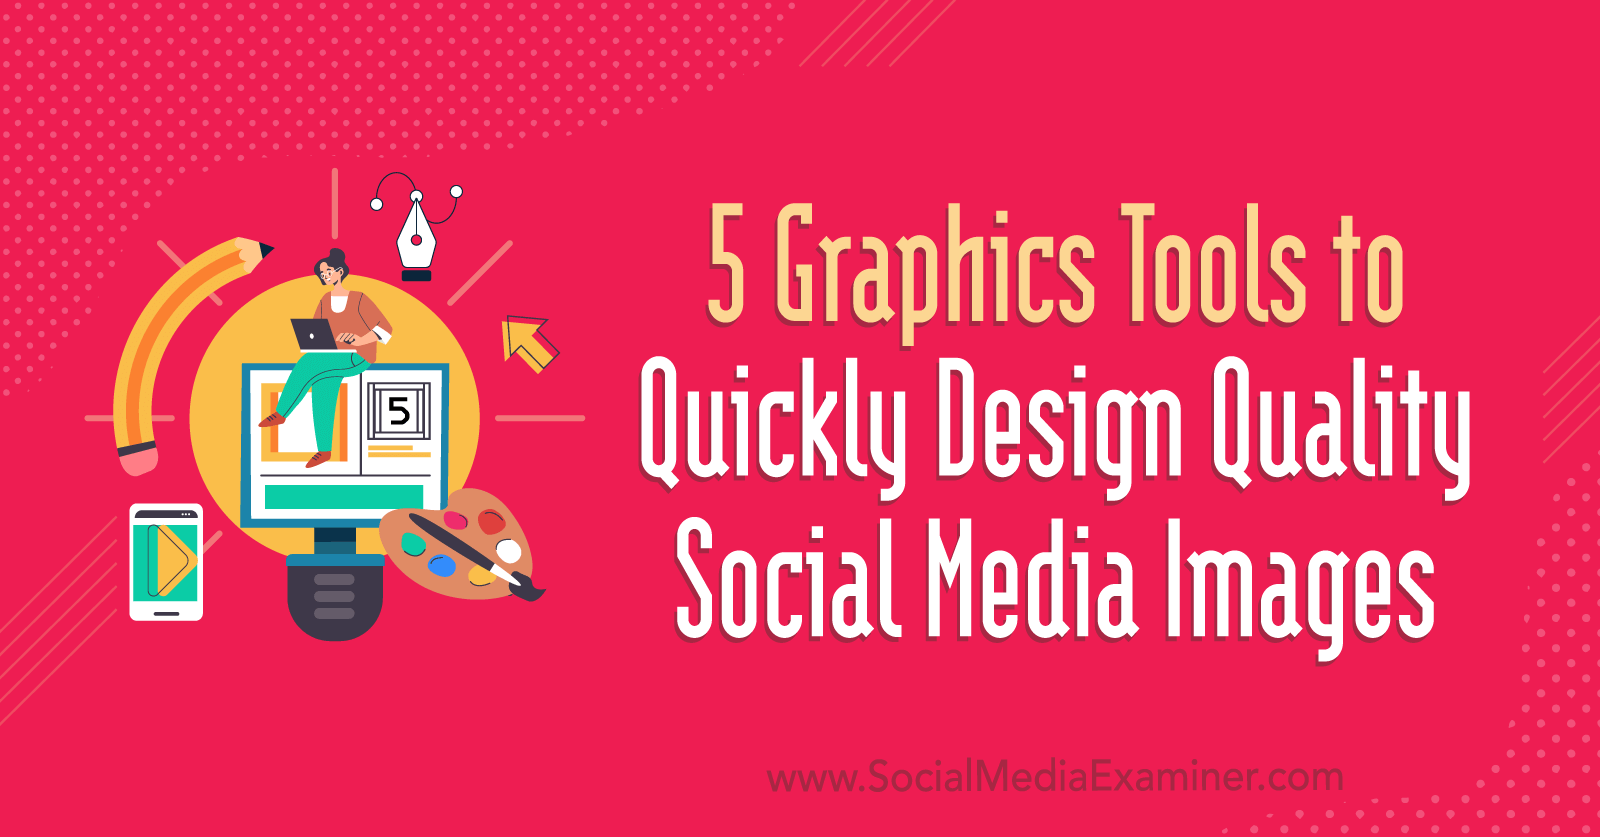 5 Graphics Tools to Quickly Design Quality Social Media Images by Social Media Examiner